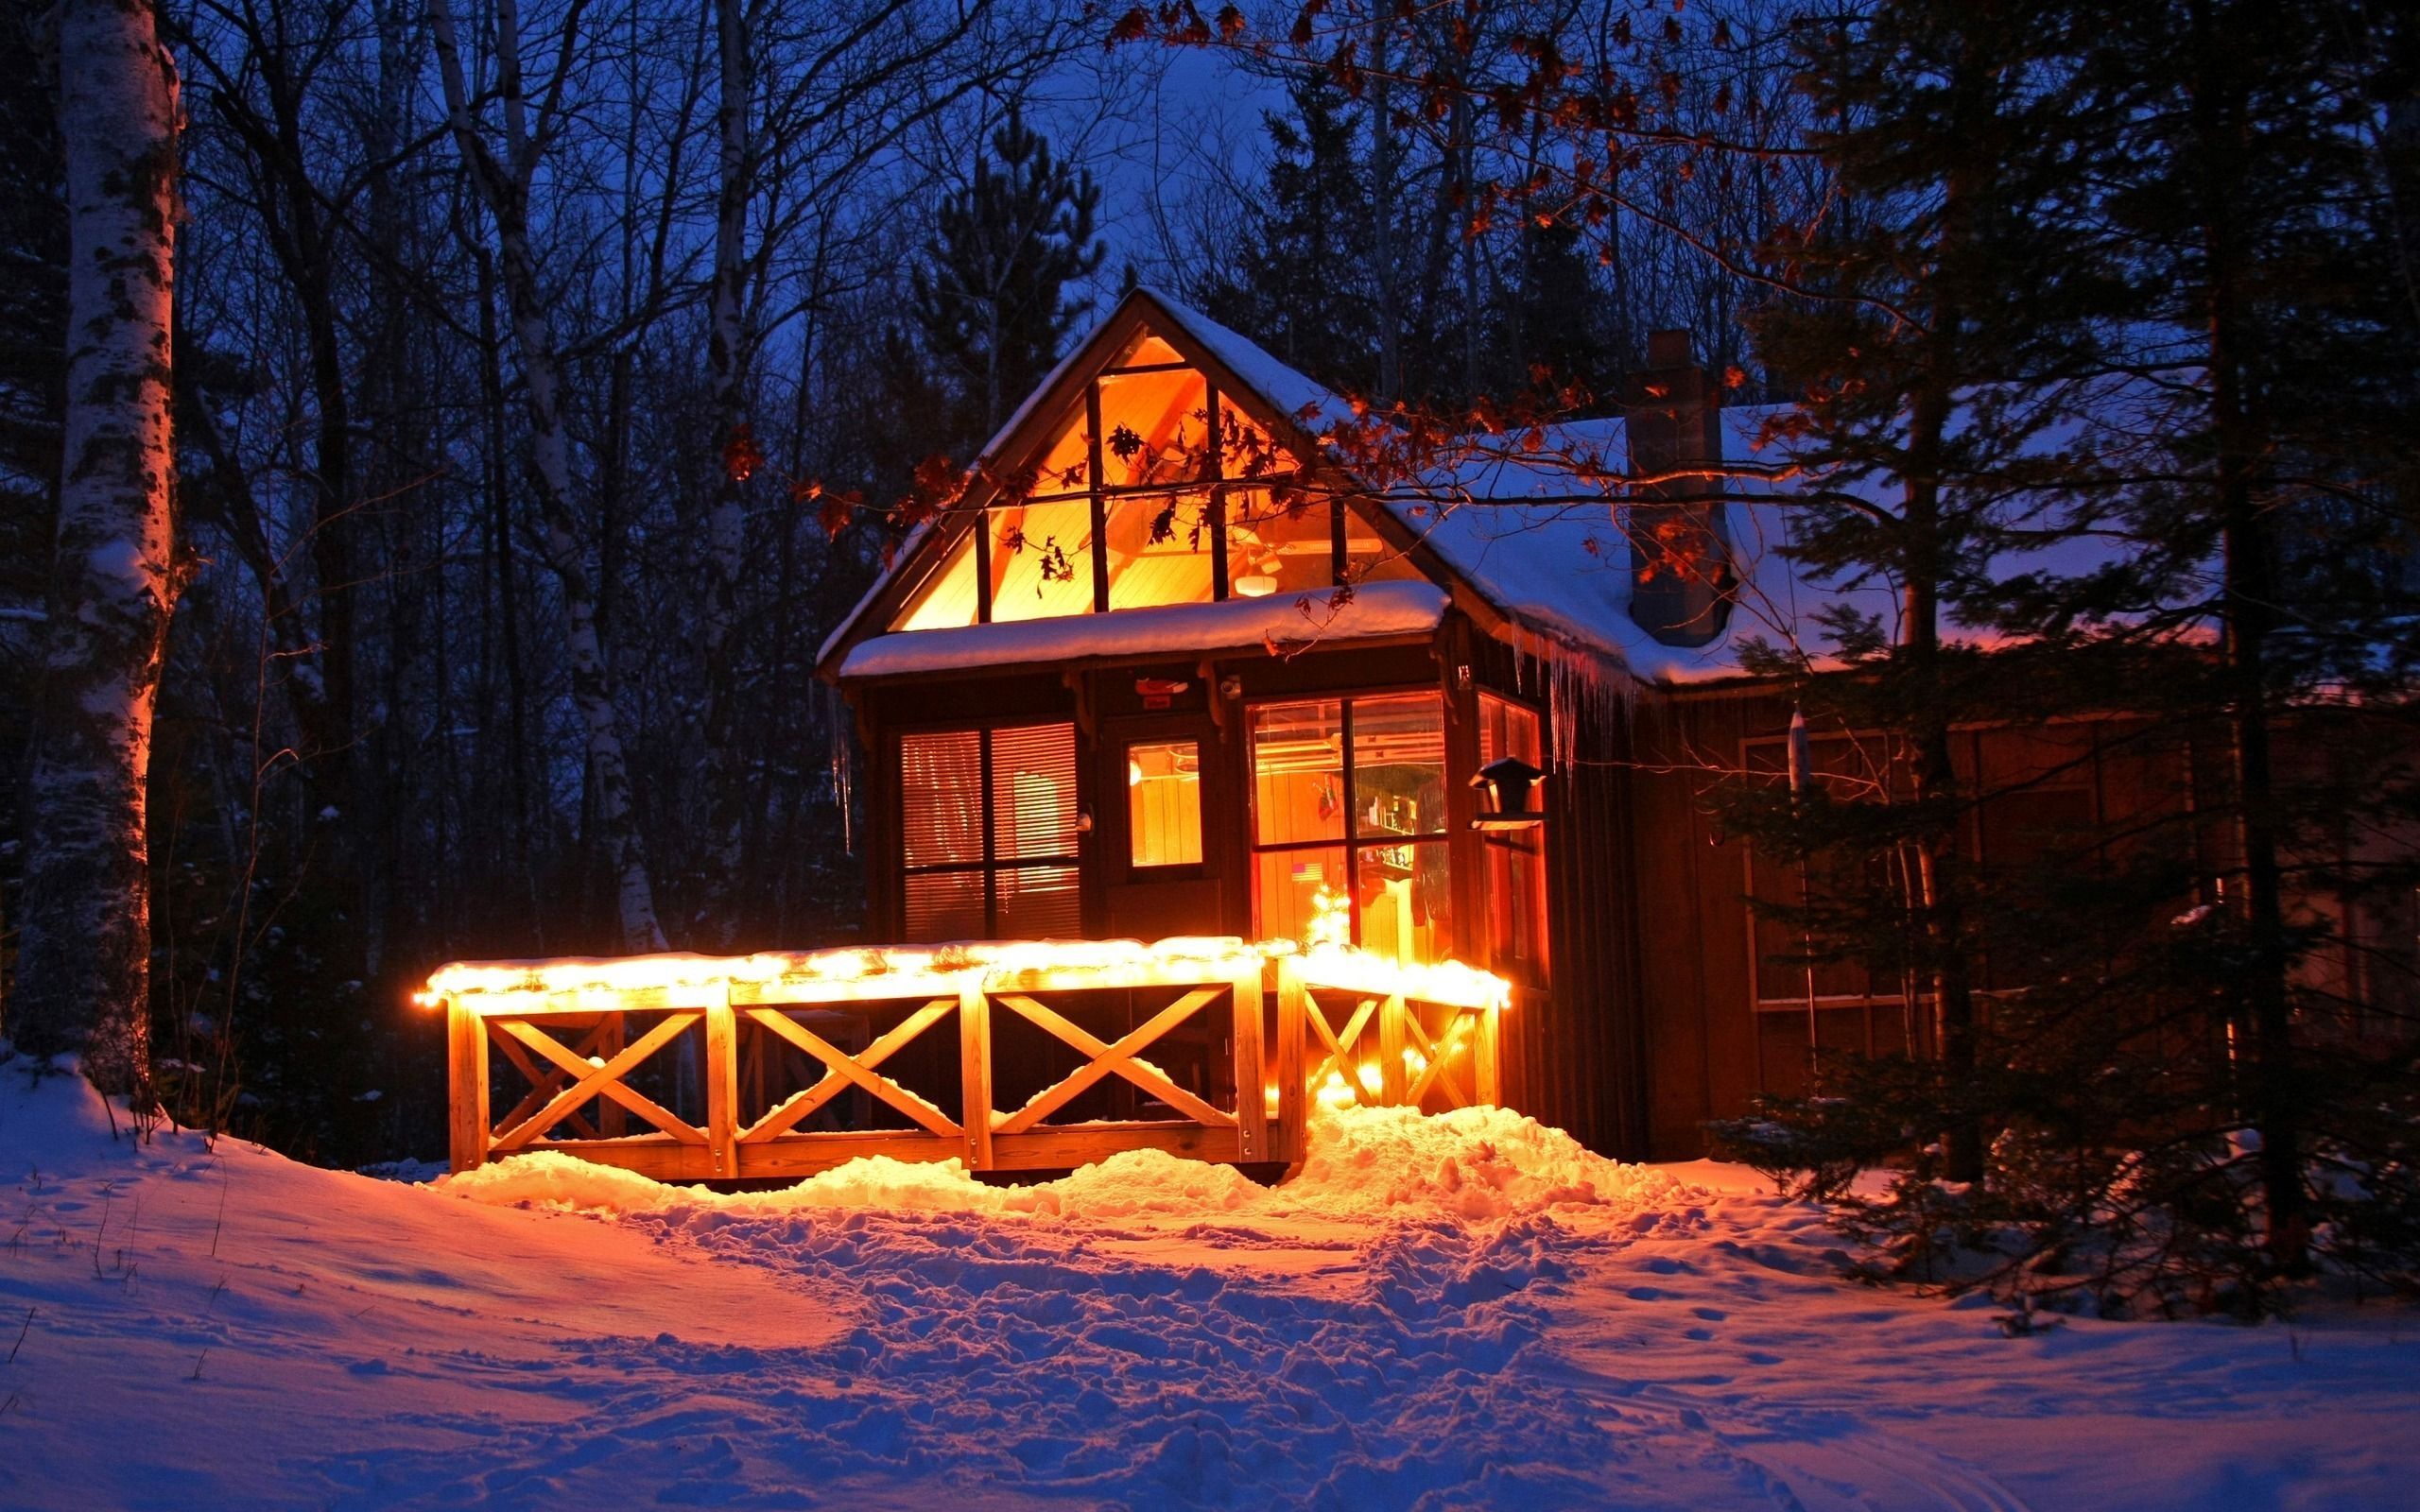 Cozy Cabin Pictures  Download Free Images on Unsplash